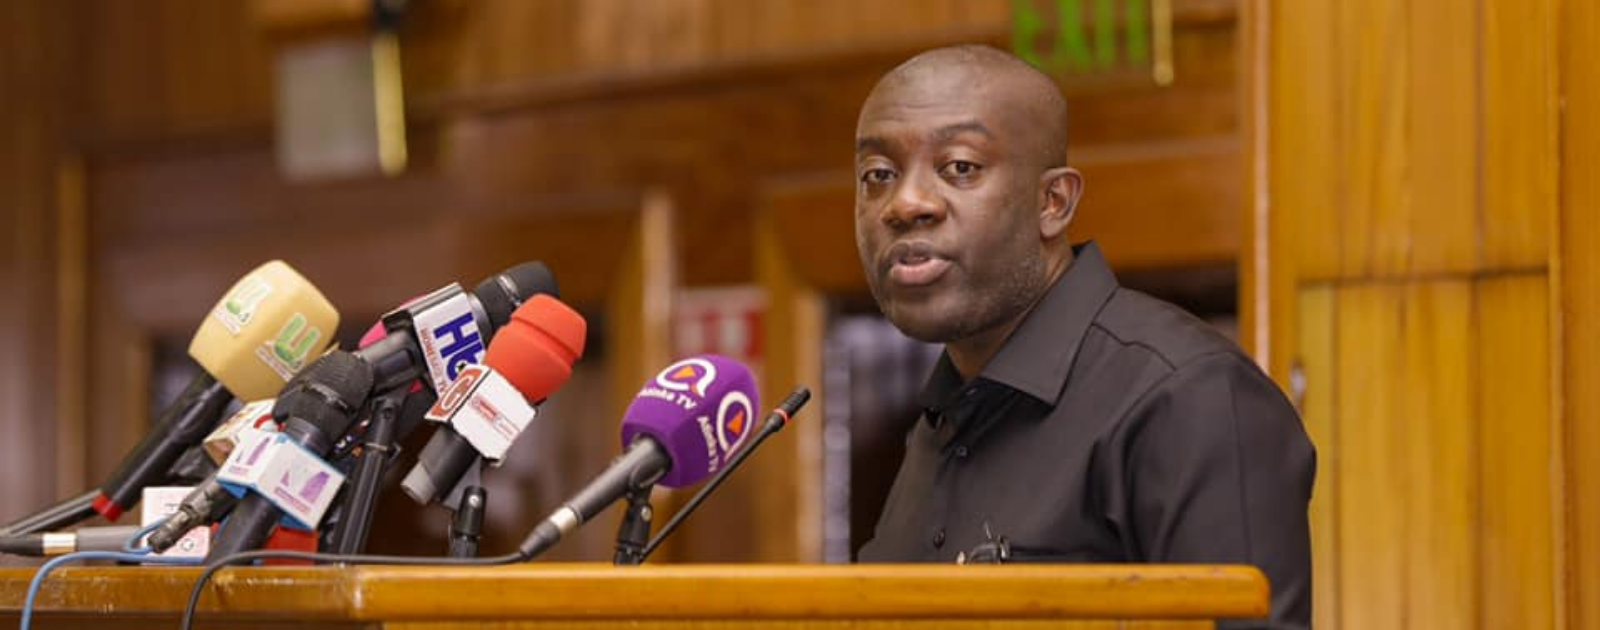 COVID-19: Second lockdown imminent - Oppong Nkrumah warns as active cases surge